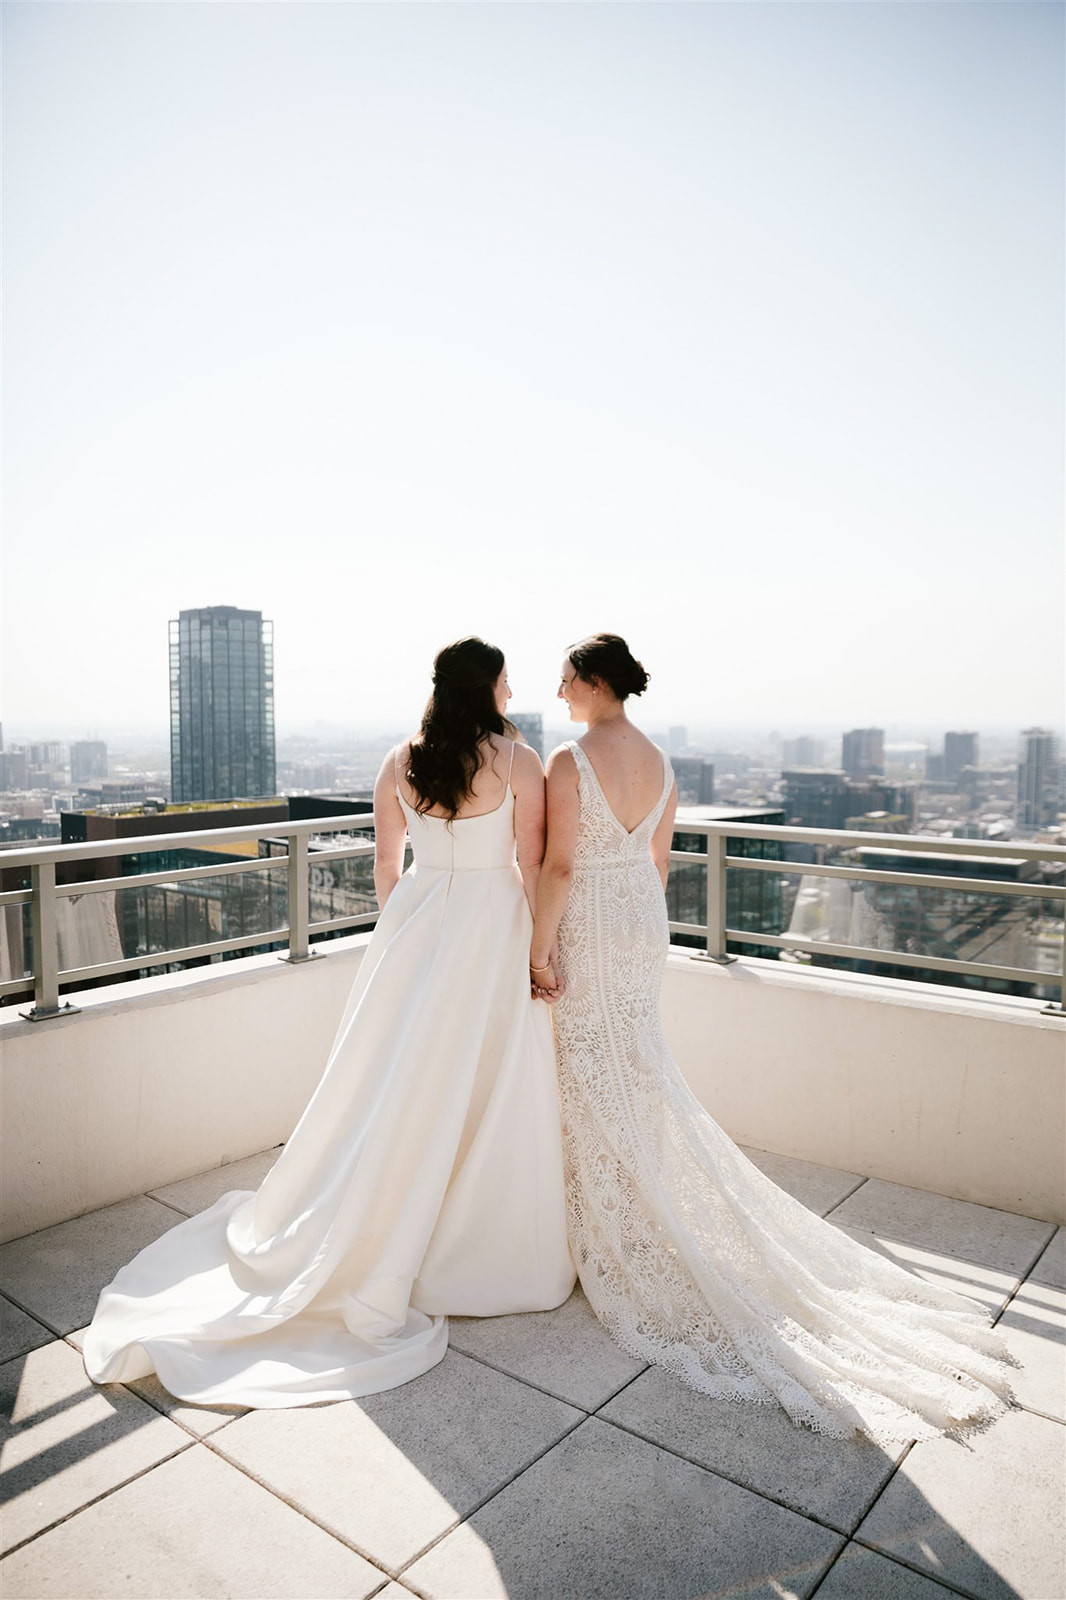 Two brides sharing a first look on Chicago rooftop and skyline backdrop, embracing in a moment of love and anticipation.